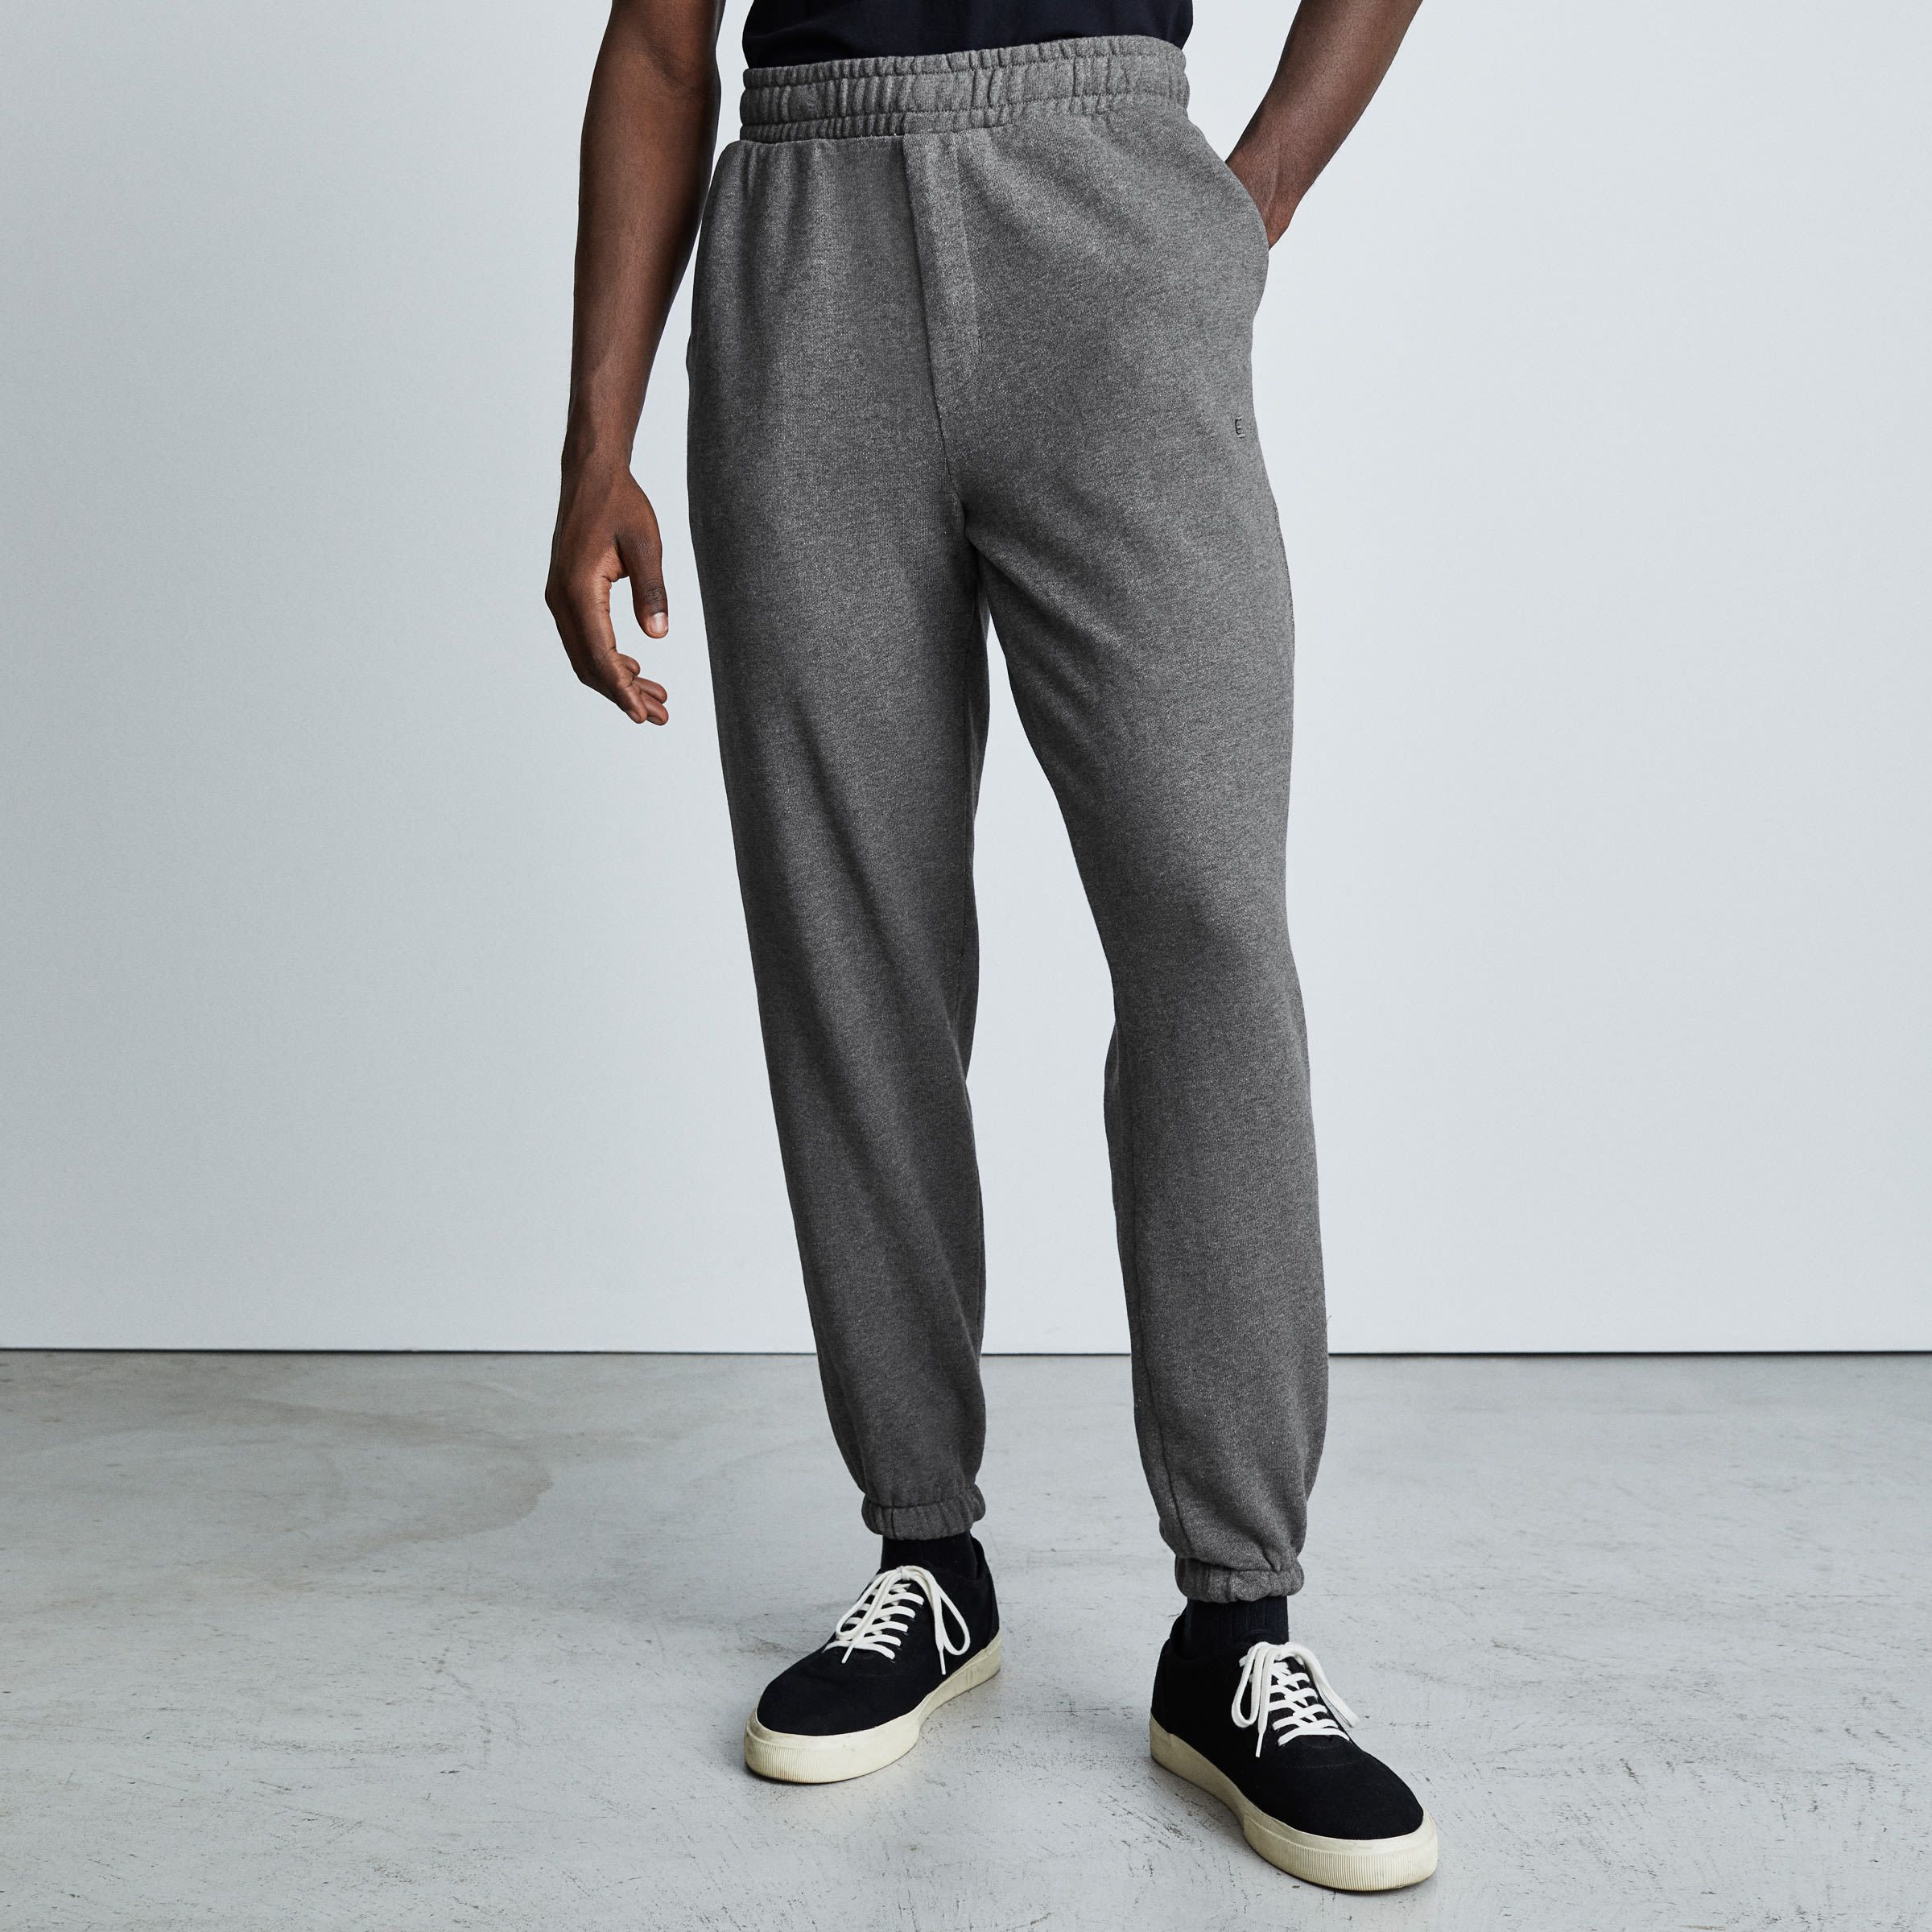 Upgrade Your Workout Wardrobe with Dark Blue Sports Track Pants for Men:  Solid Pattern, Full Length, and Slim Fit - Get 10% Off Now!